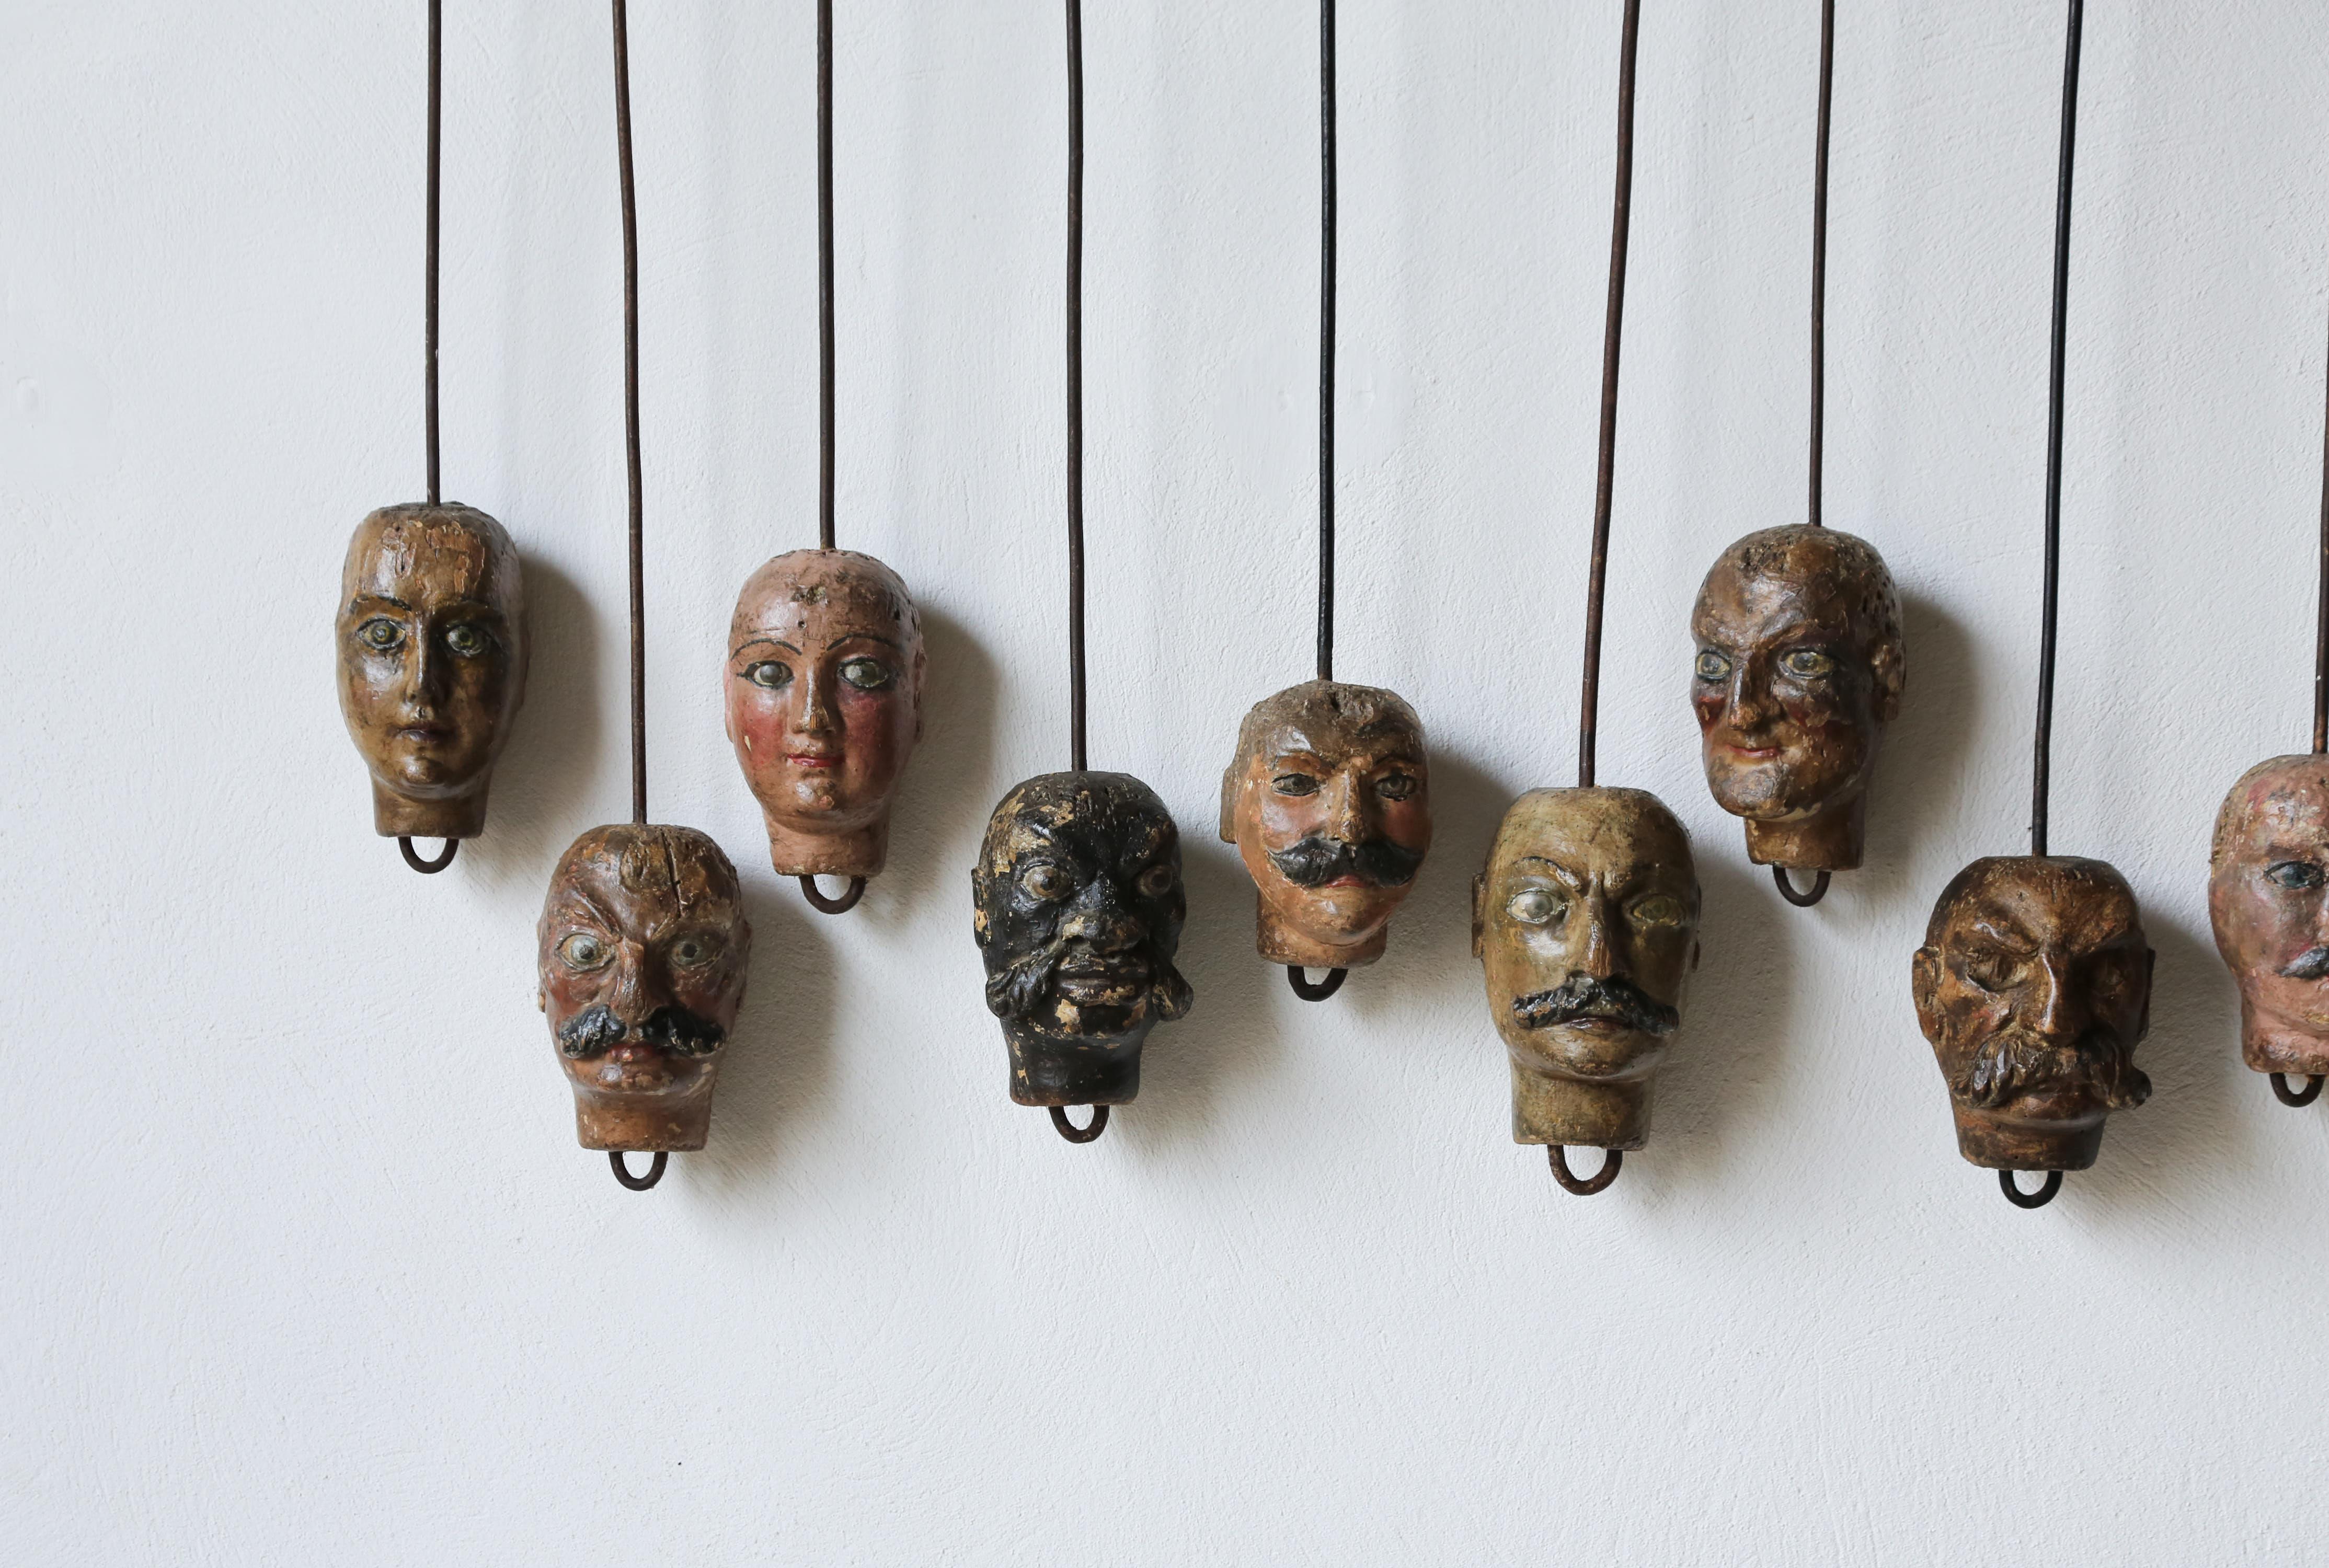 Exceptional Set of 24 Unique Hand-crafted Marionette Heads, Italy, 19th Century For Sale 2